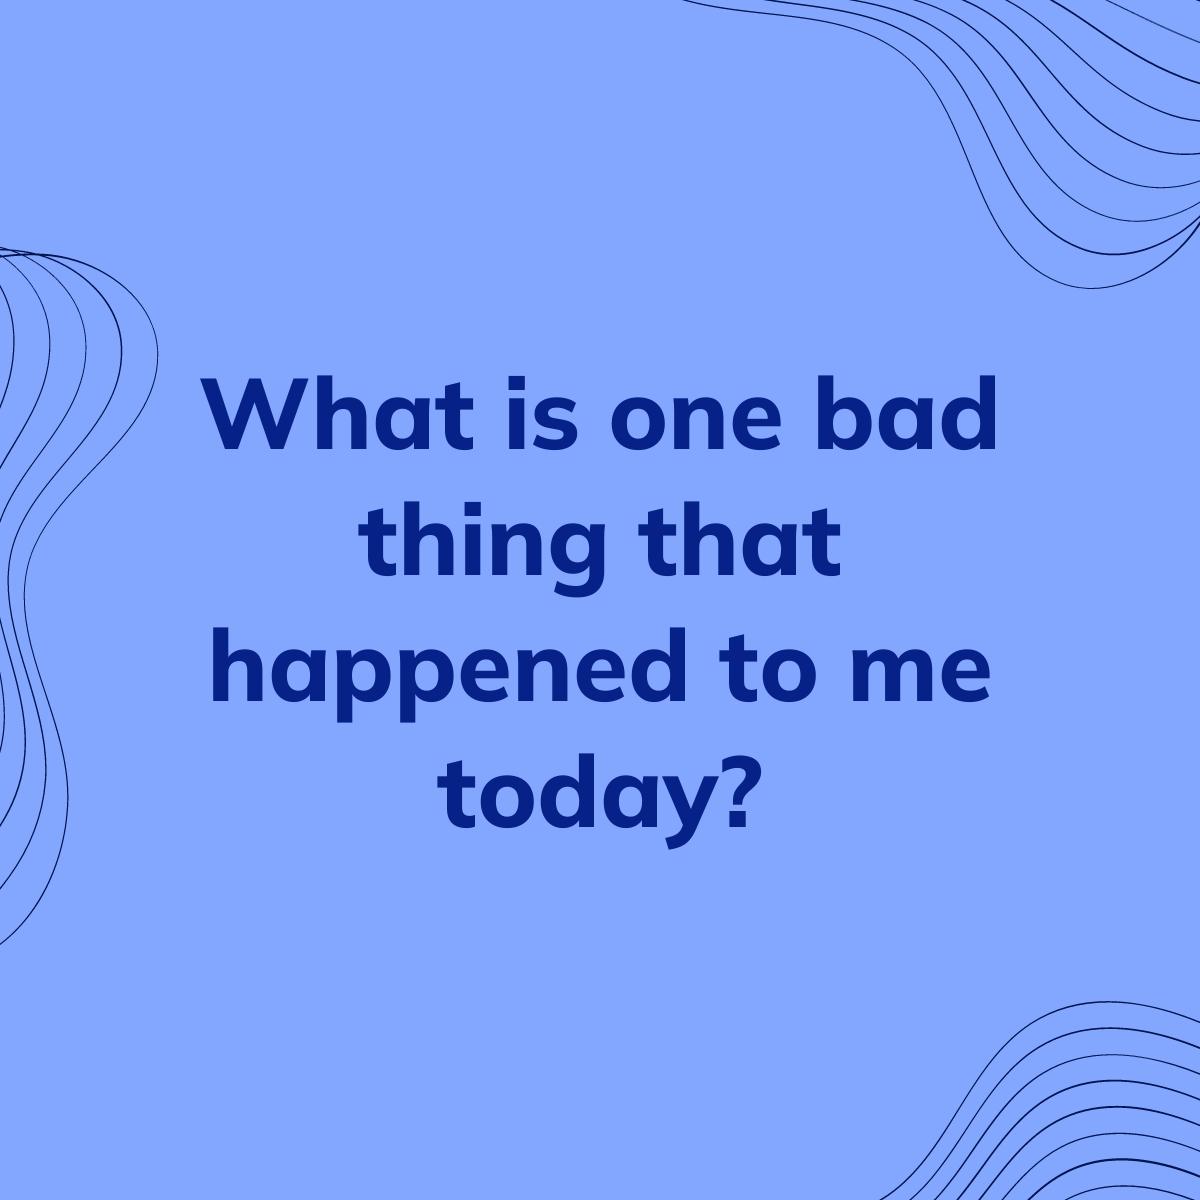 Journal Prompt: What is one bad thing that happened to me today?